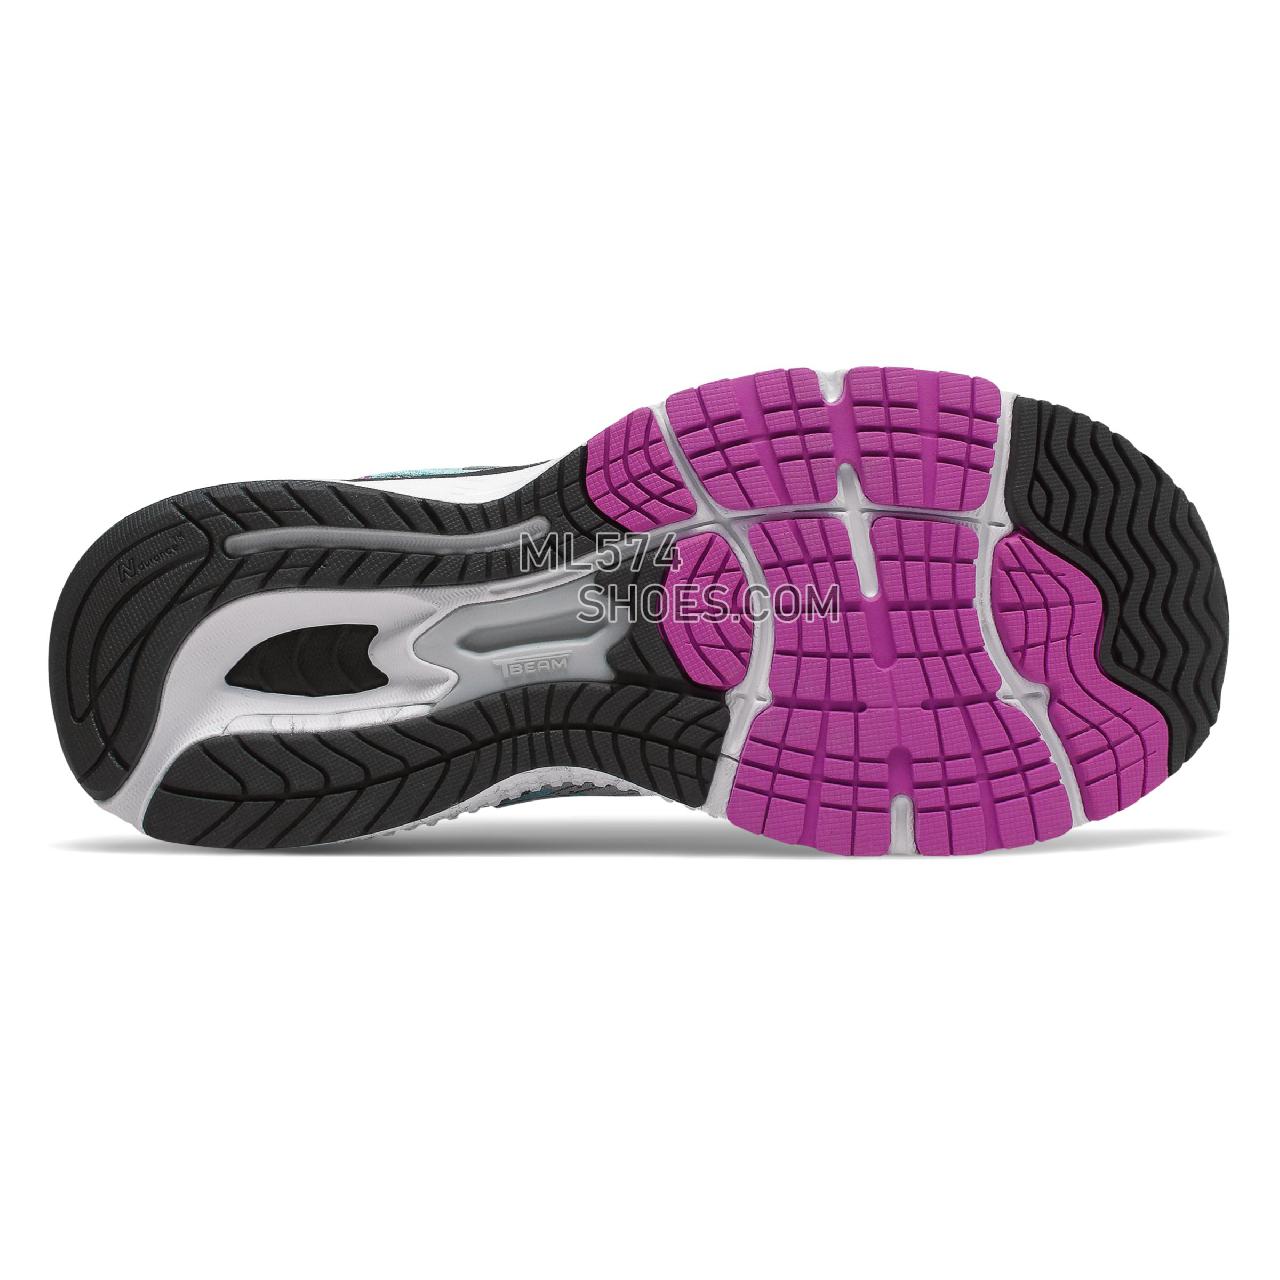 New Balance 860v9 - Women's 860 - Running White with Voltage Violet and Black - W860WP9